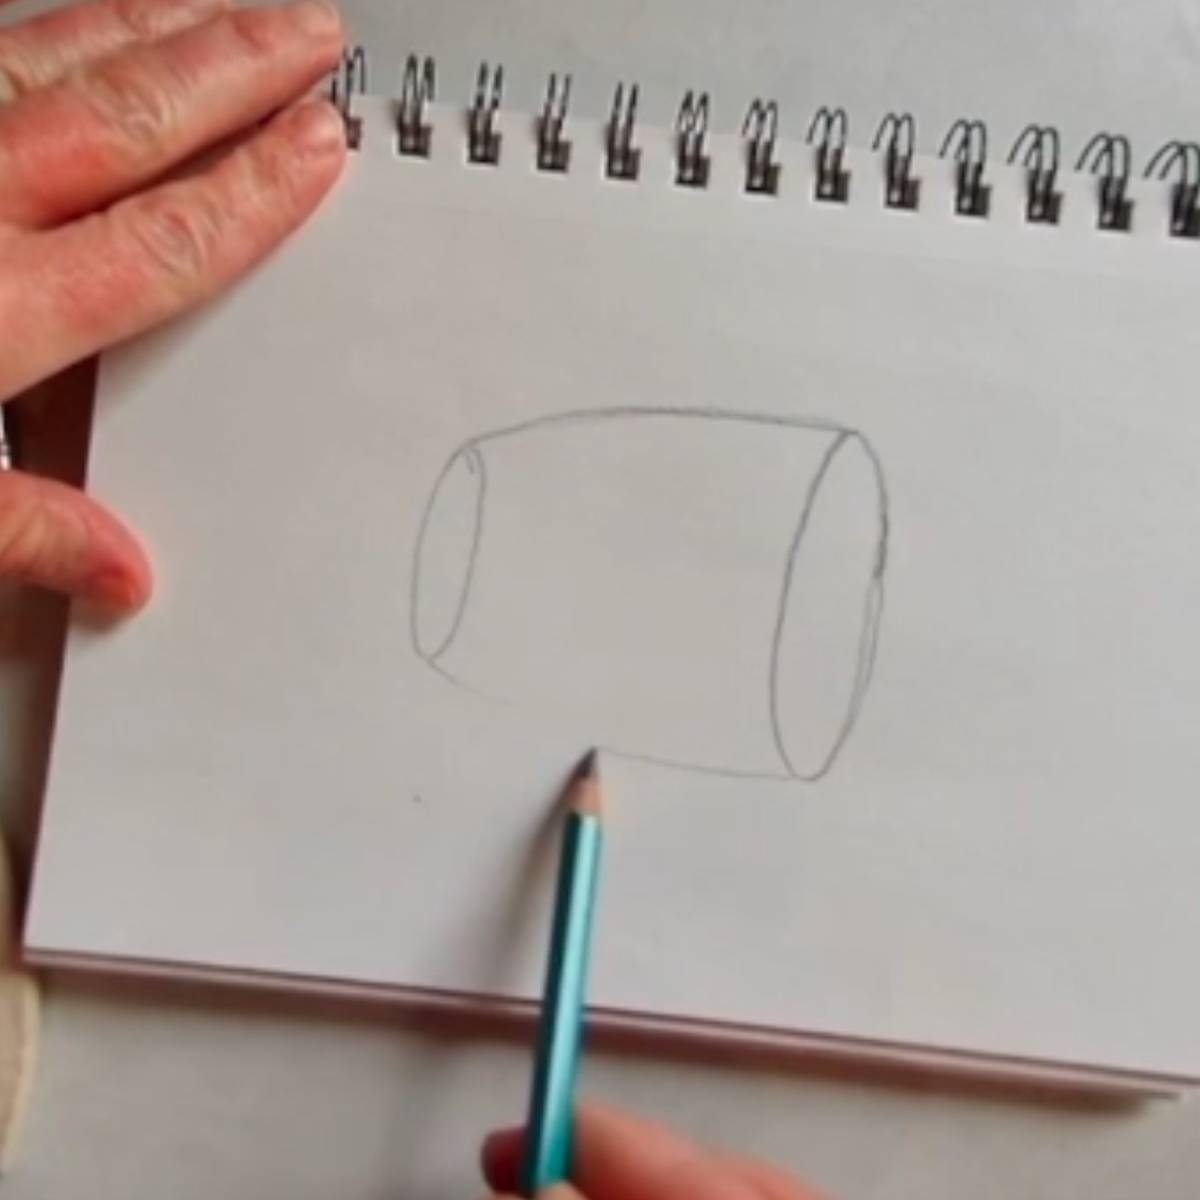 Beginning sketch of a coffee mug in pencil with two ovals with connecting lines for the sides of the mug.